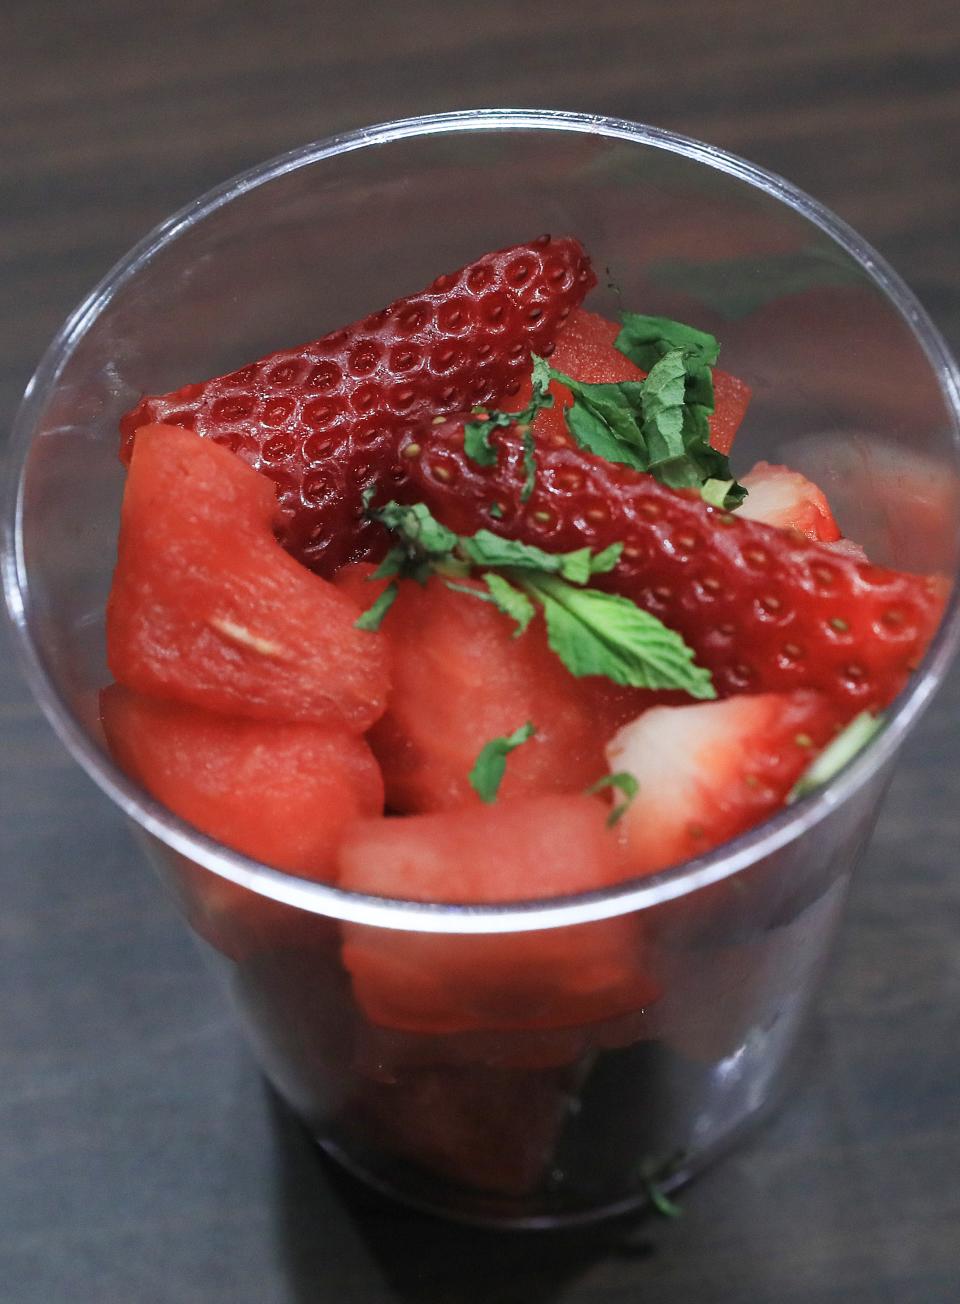 A sample of the Watermelon and Strawberry Salad that will be offered this year at the El Paso Chihuahuas.